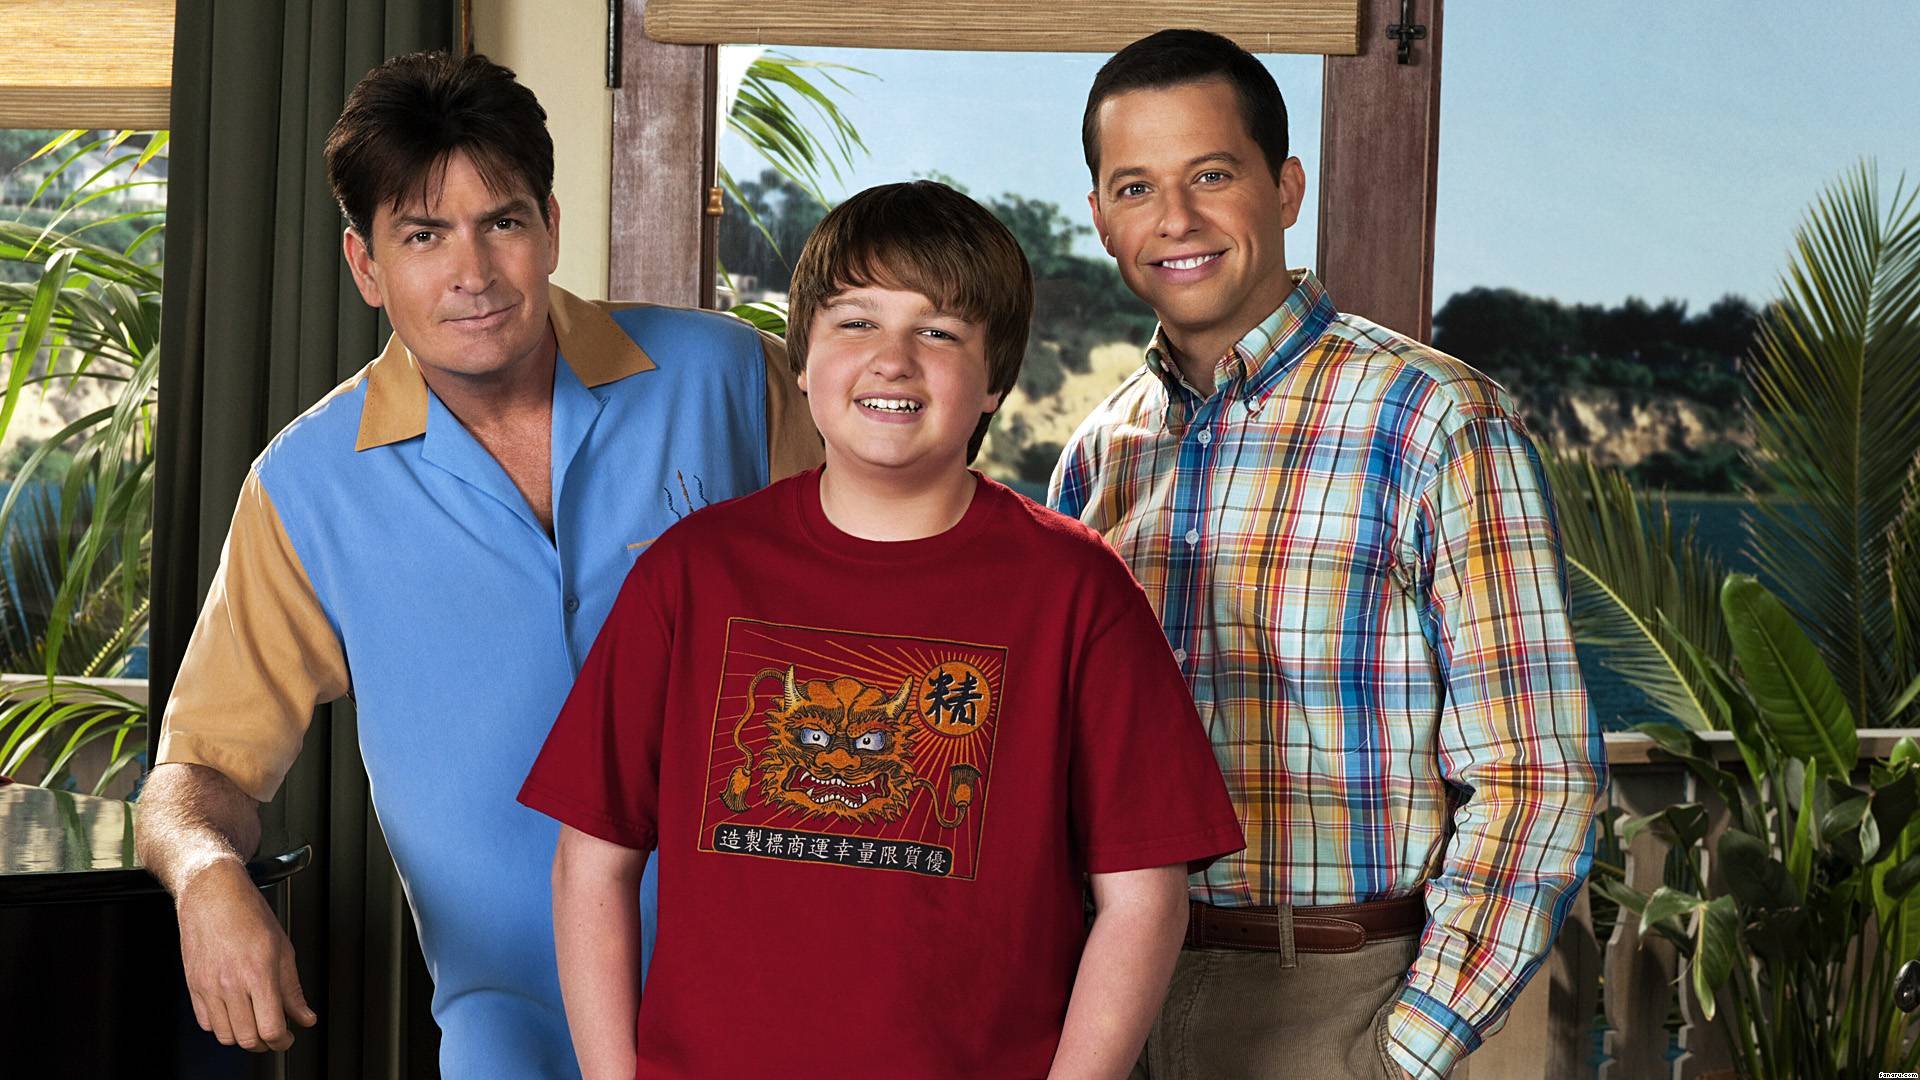 two and a half men, Comedy, Television, Series, Two, Half, Men